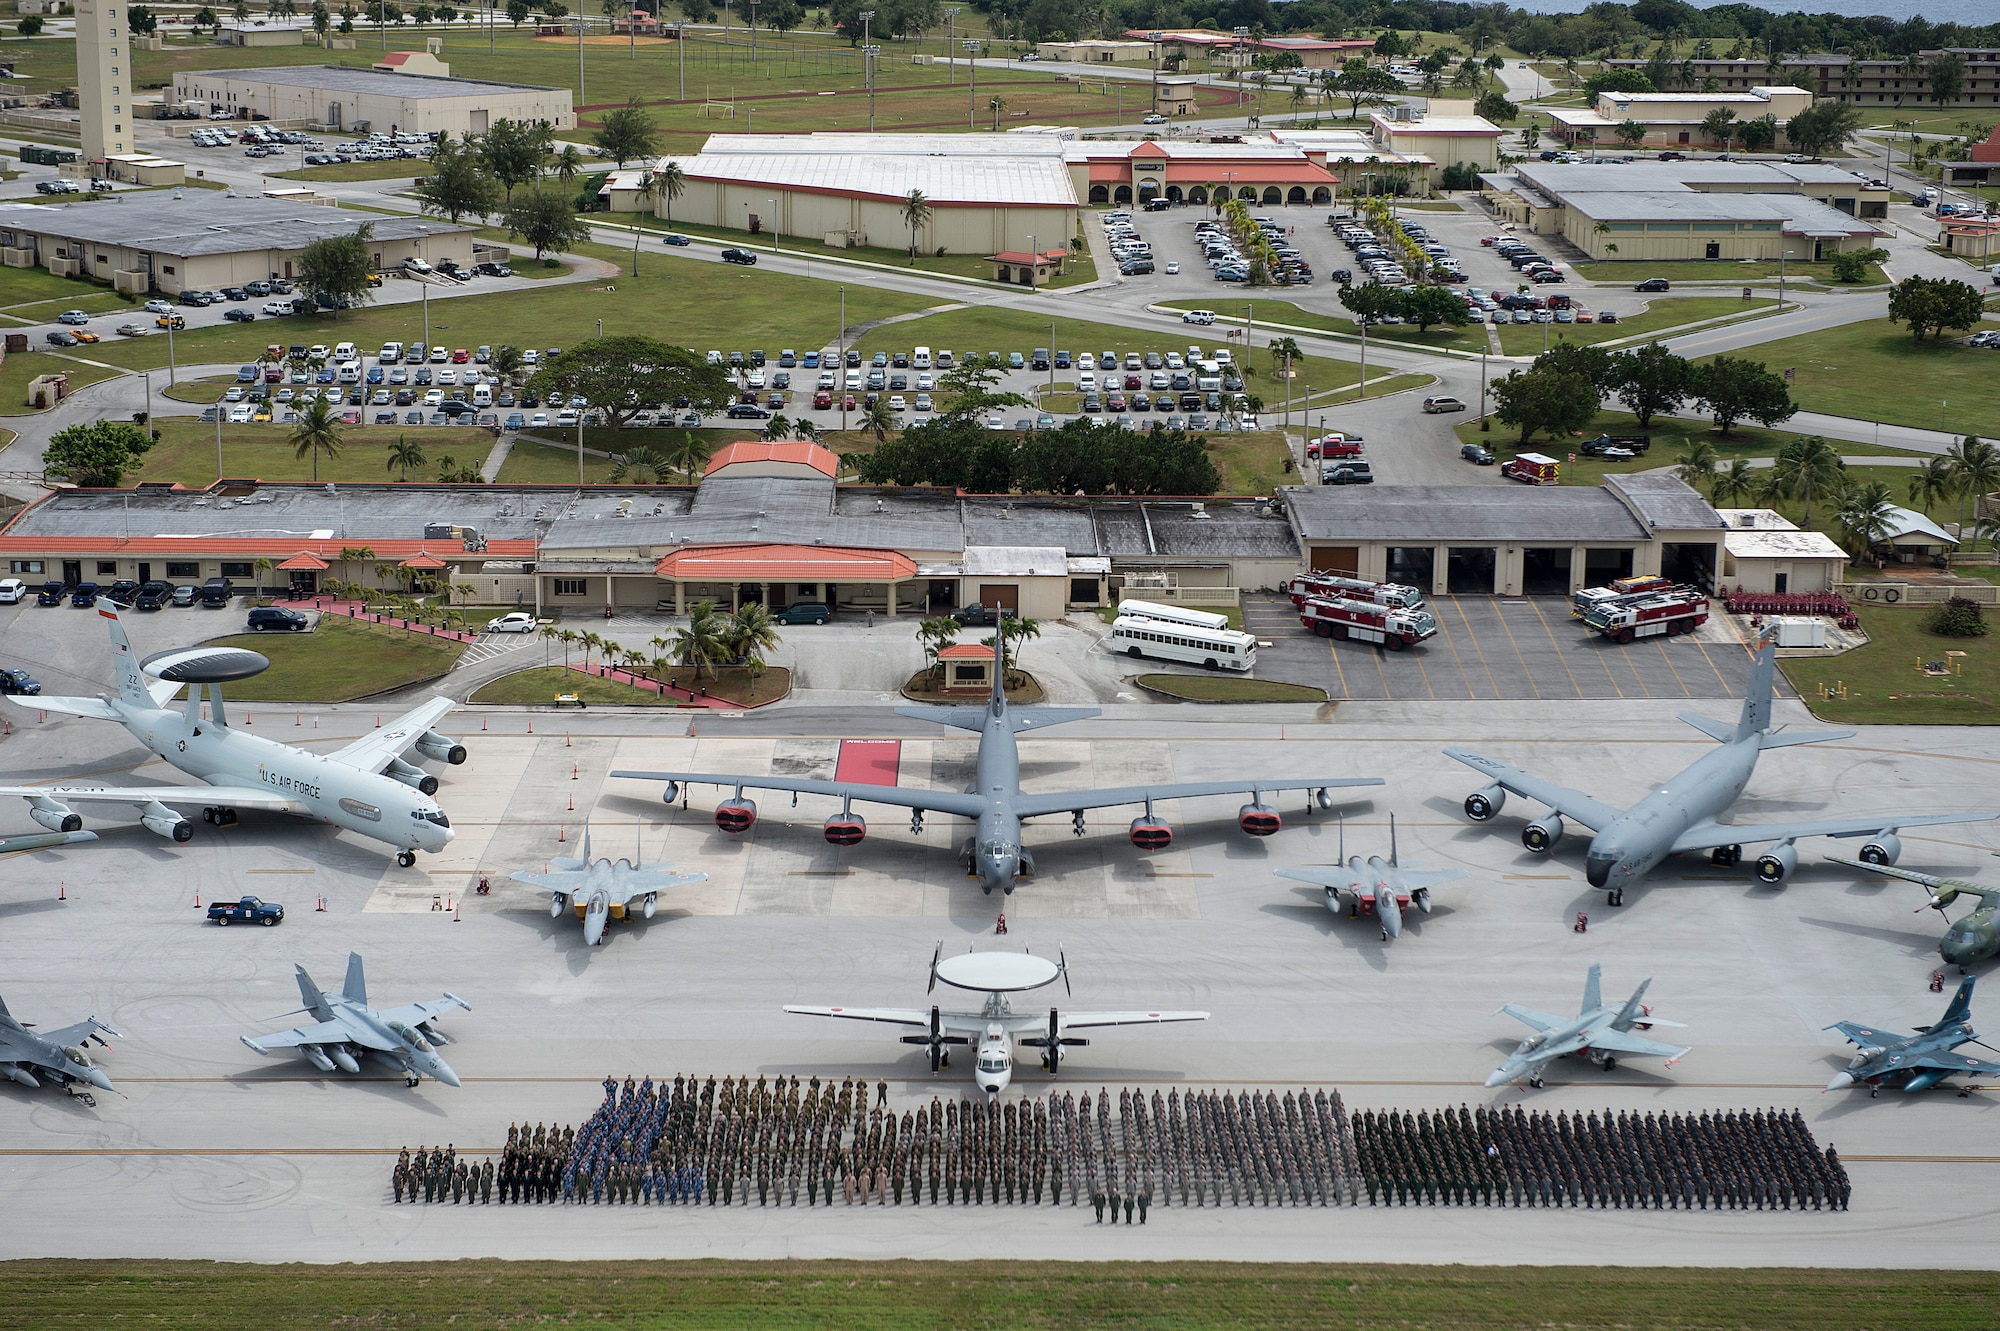 Exercise COPE NORTH 15 participates and aircraft from the U.S. Air Force, U.S. Navy, Japan Air Self-Defense Force, Royal Australian Air Force, Republic of Korea Air Force, Royal New Zealand Air Force, and Philippine Air Force participate in a group photo event Feb.13, 2015, at Anderson Air Force Base, Guam. COPE NORTH is an annual multilateral field training exercise that emphasizes the exchange and execution of tactics, techniques and procedures, while enhancing interoperability. (U.S. Air Force photo by Tech. Sgt. Jason Robertson/released)